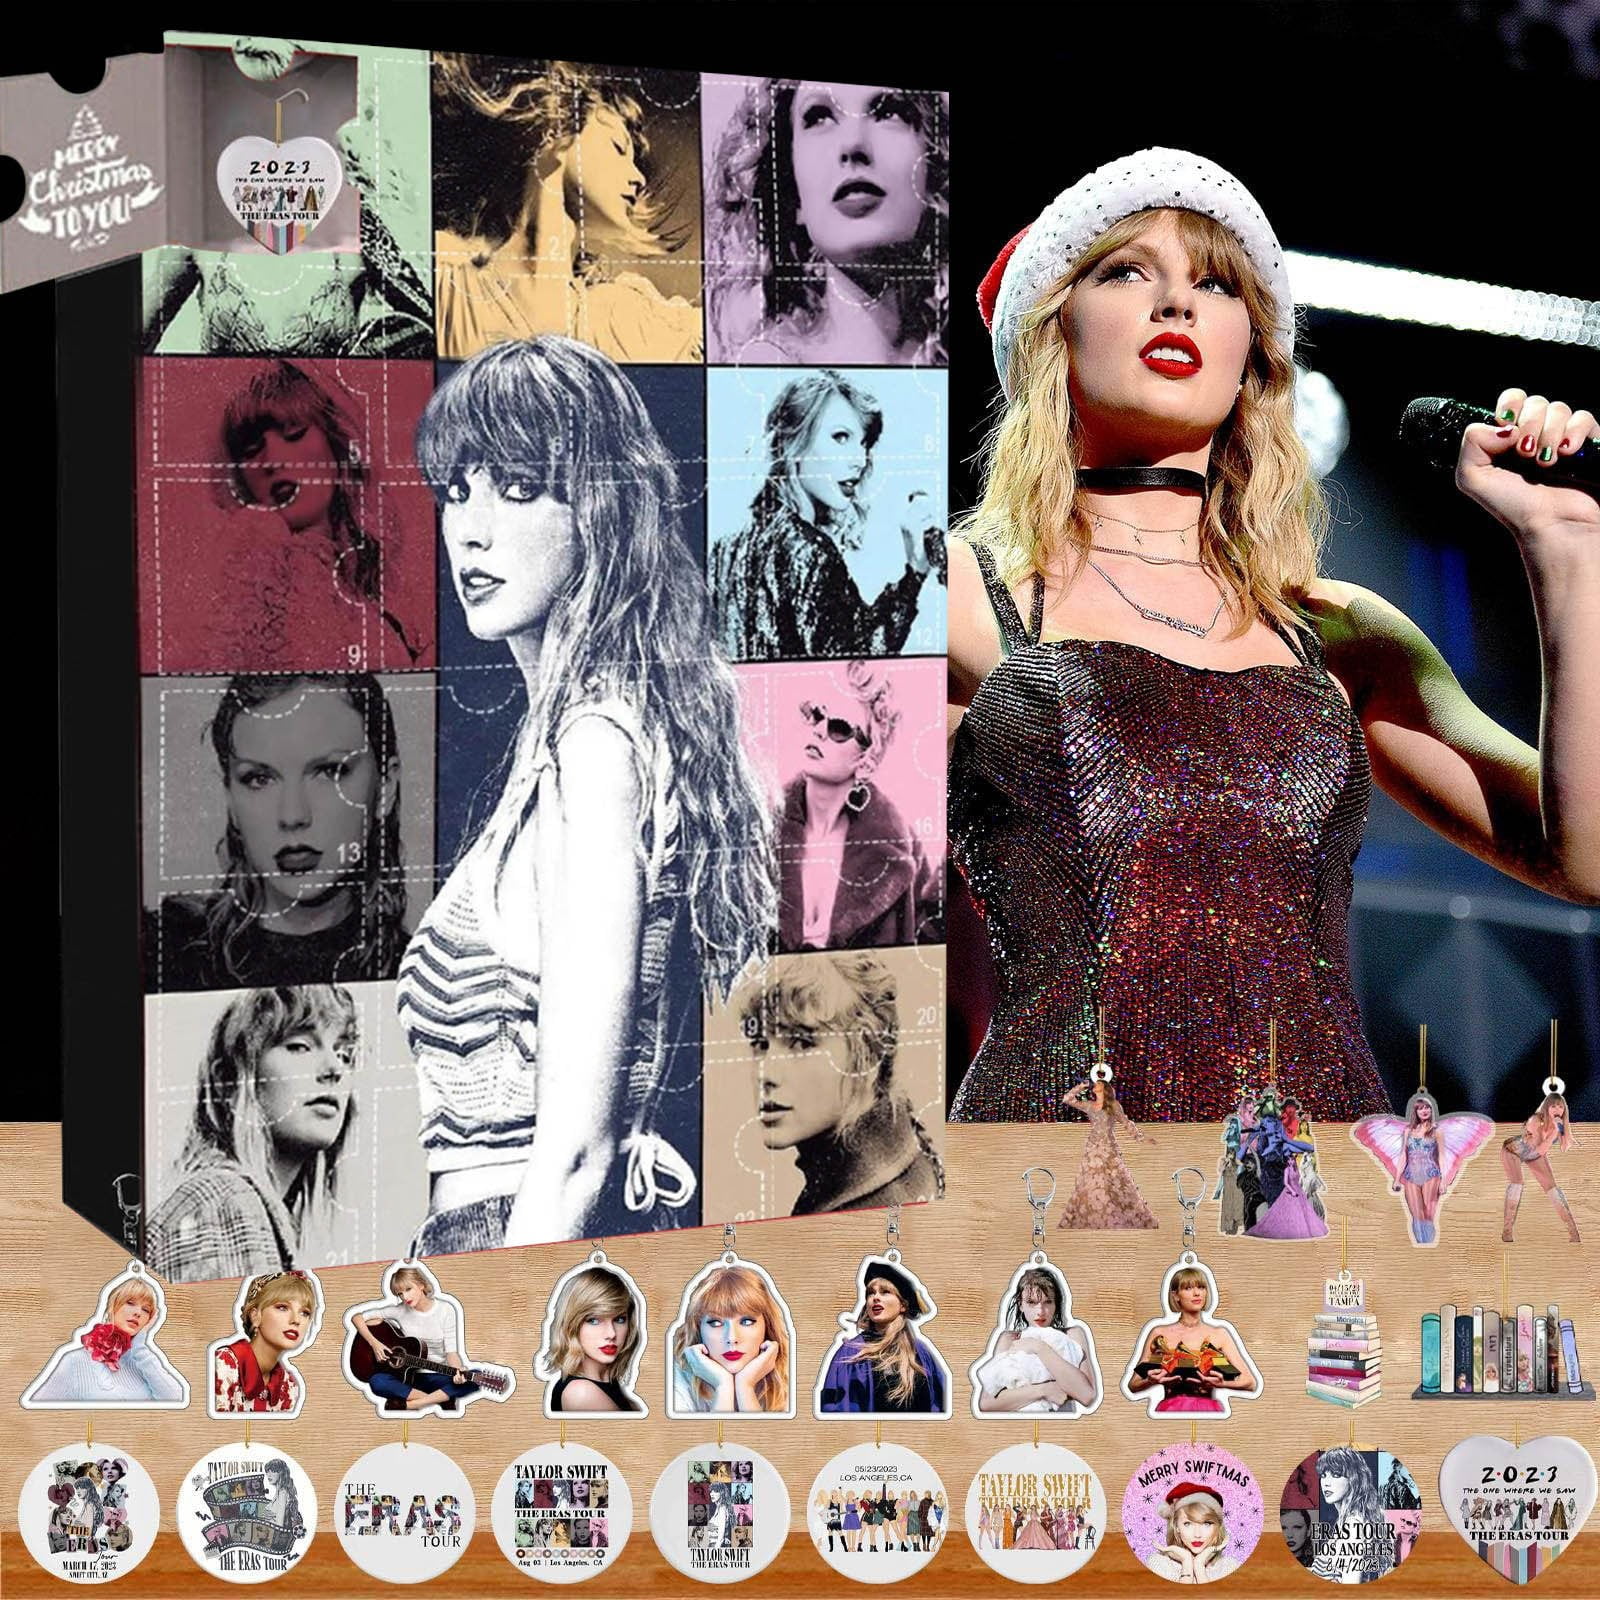 Go! Calendars Games Toys store has Taylor Swift calendars for 2022